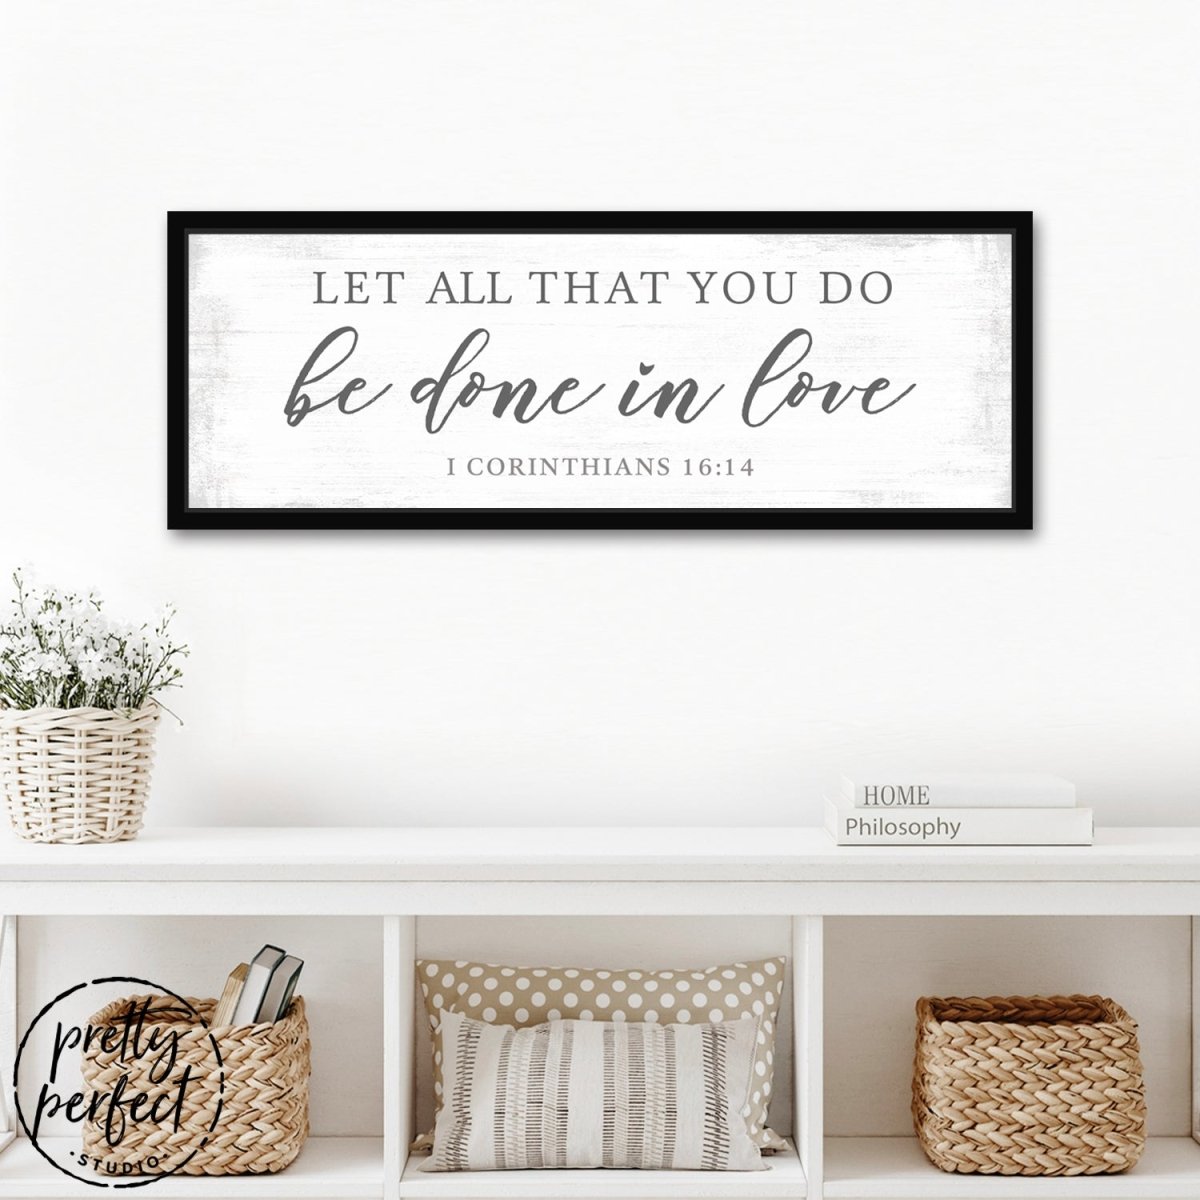 Let All That You Do Be Done In Love Sign Above Table in Living Room - Pretty Perfect Studio